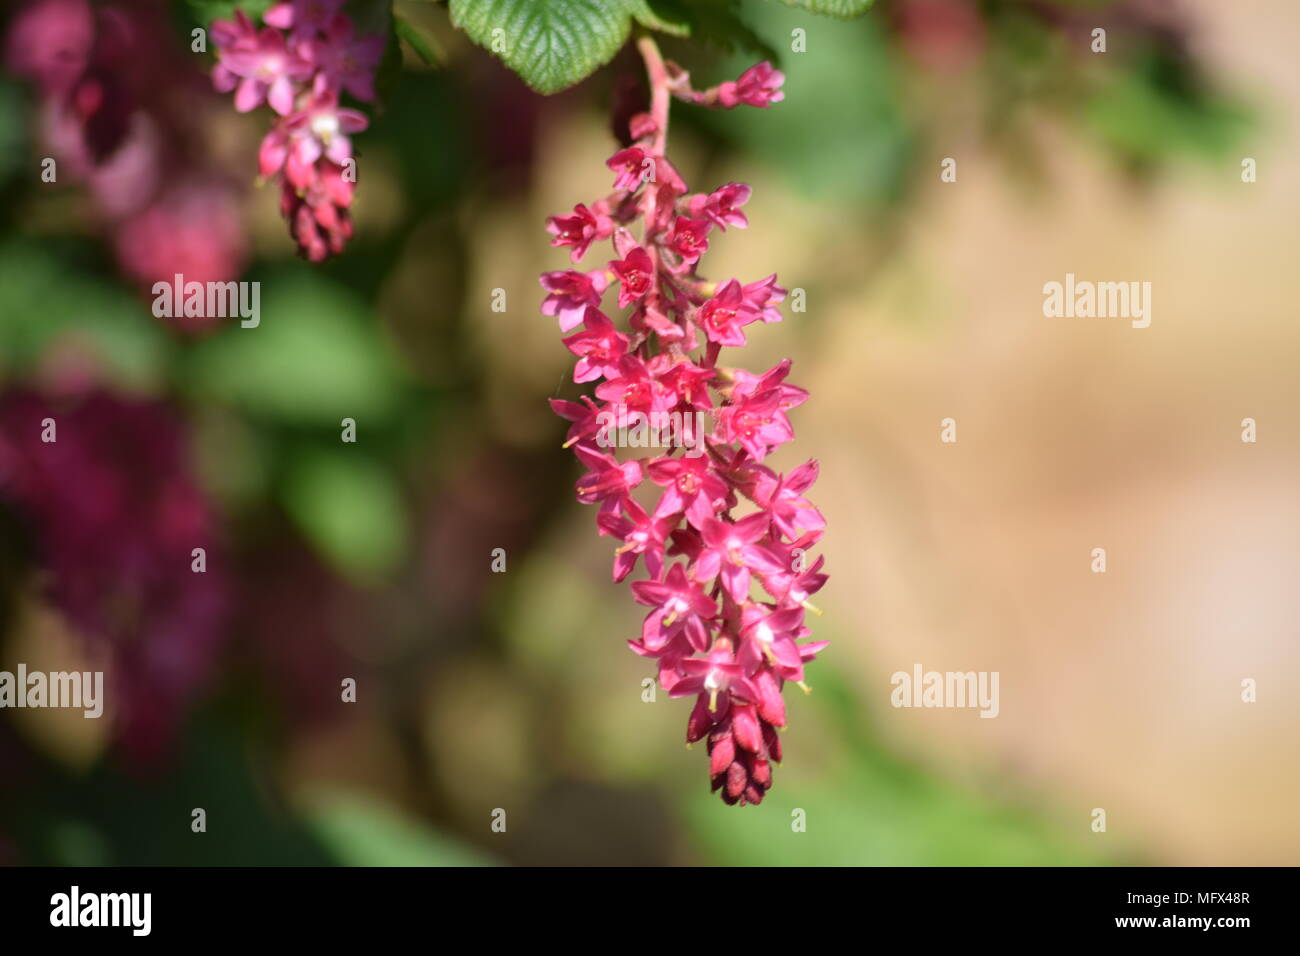 SPRING FLOWERING GARDEN SHRUB: THE PINK FLOWER OF FLOWERING CURRANT IN APRIL. WEST SUSSEX. 2018 Stock Photo